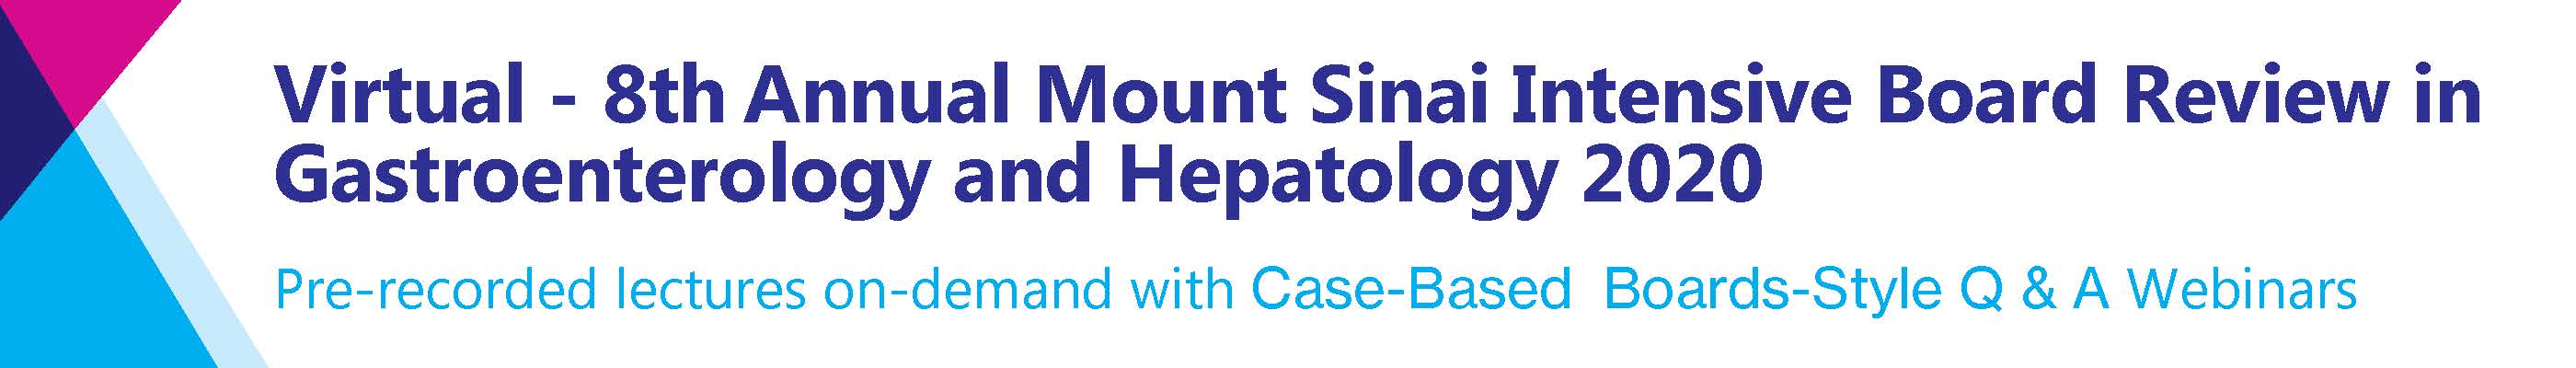 8th Annual Mount Sinai Intensive Board Review in Gastroenterology and Hepatology Banner